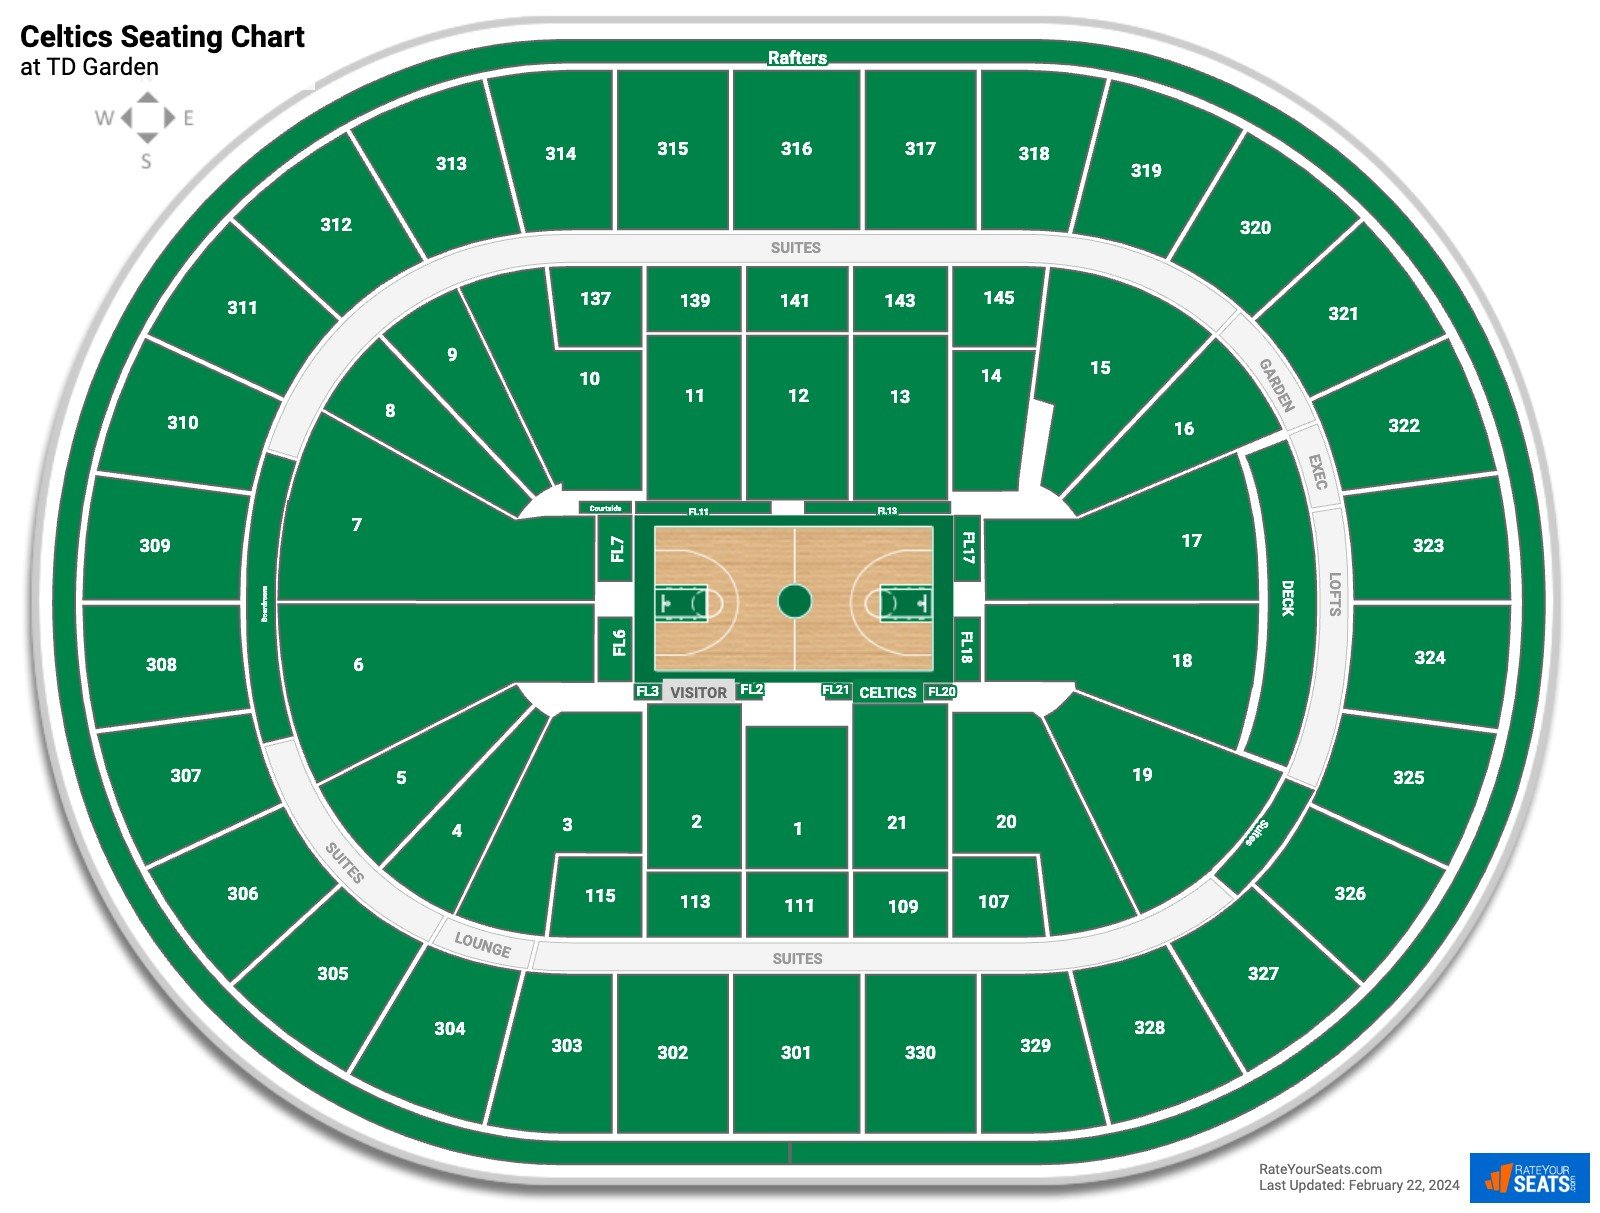 Seating Charts for TD Garden.